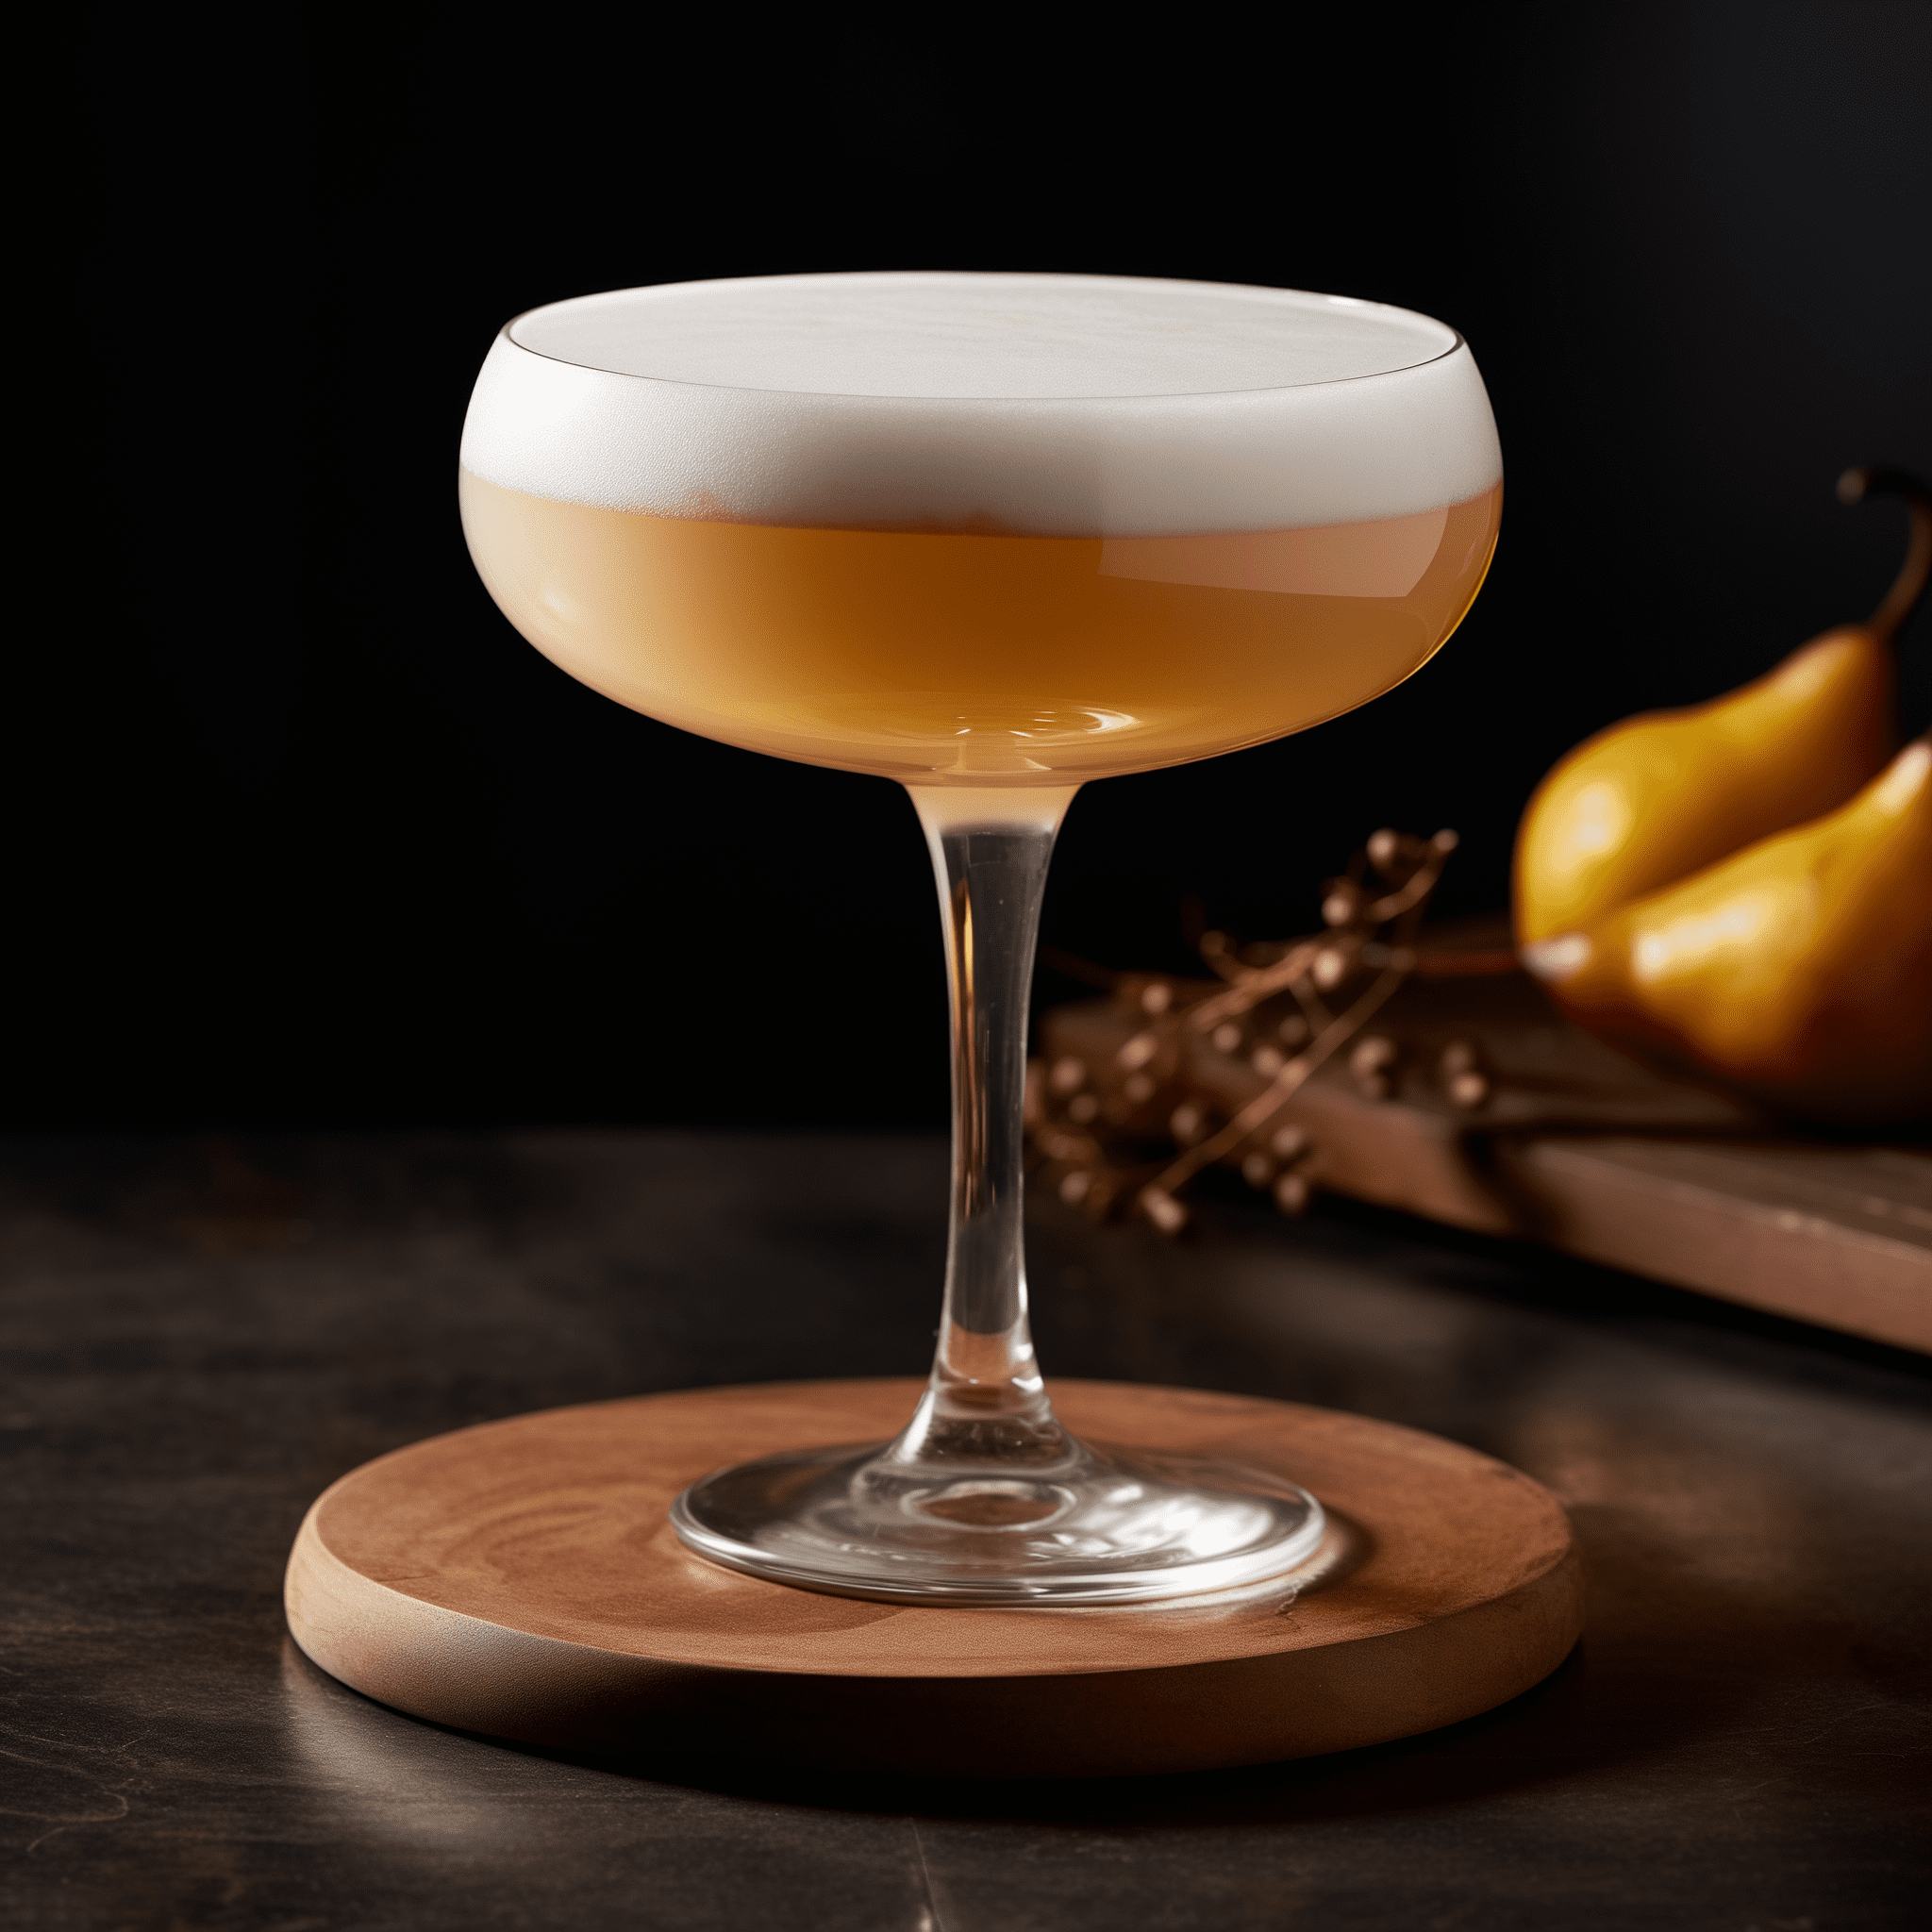 Pear Whiskey Sour Cocktail Recipe - The Pear Whiskey Sour offers a harmonious blend of mellow pear sweetness with the robustness of whiskey, complemented by a zesty lemon tang. It's a well-rounded cocktail that's both bold and smooth, with a hint of bitterness from the lemon to cut through the sweetness.